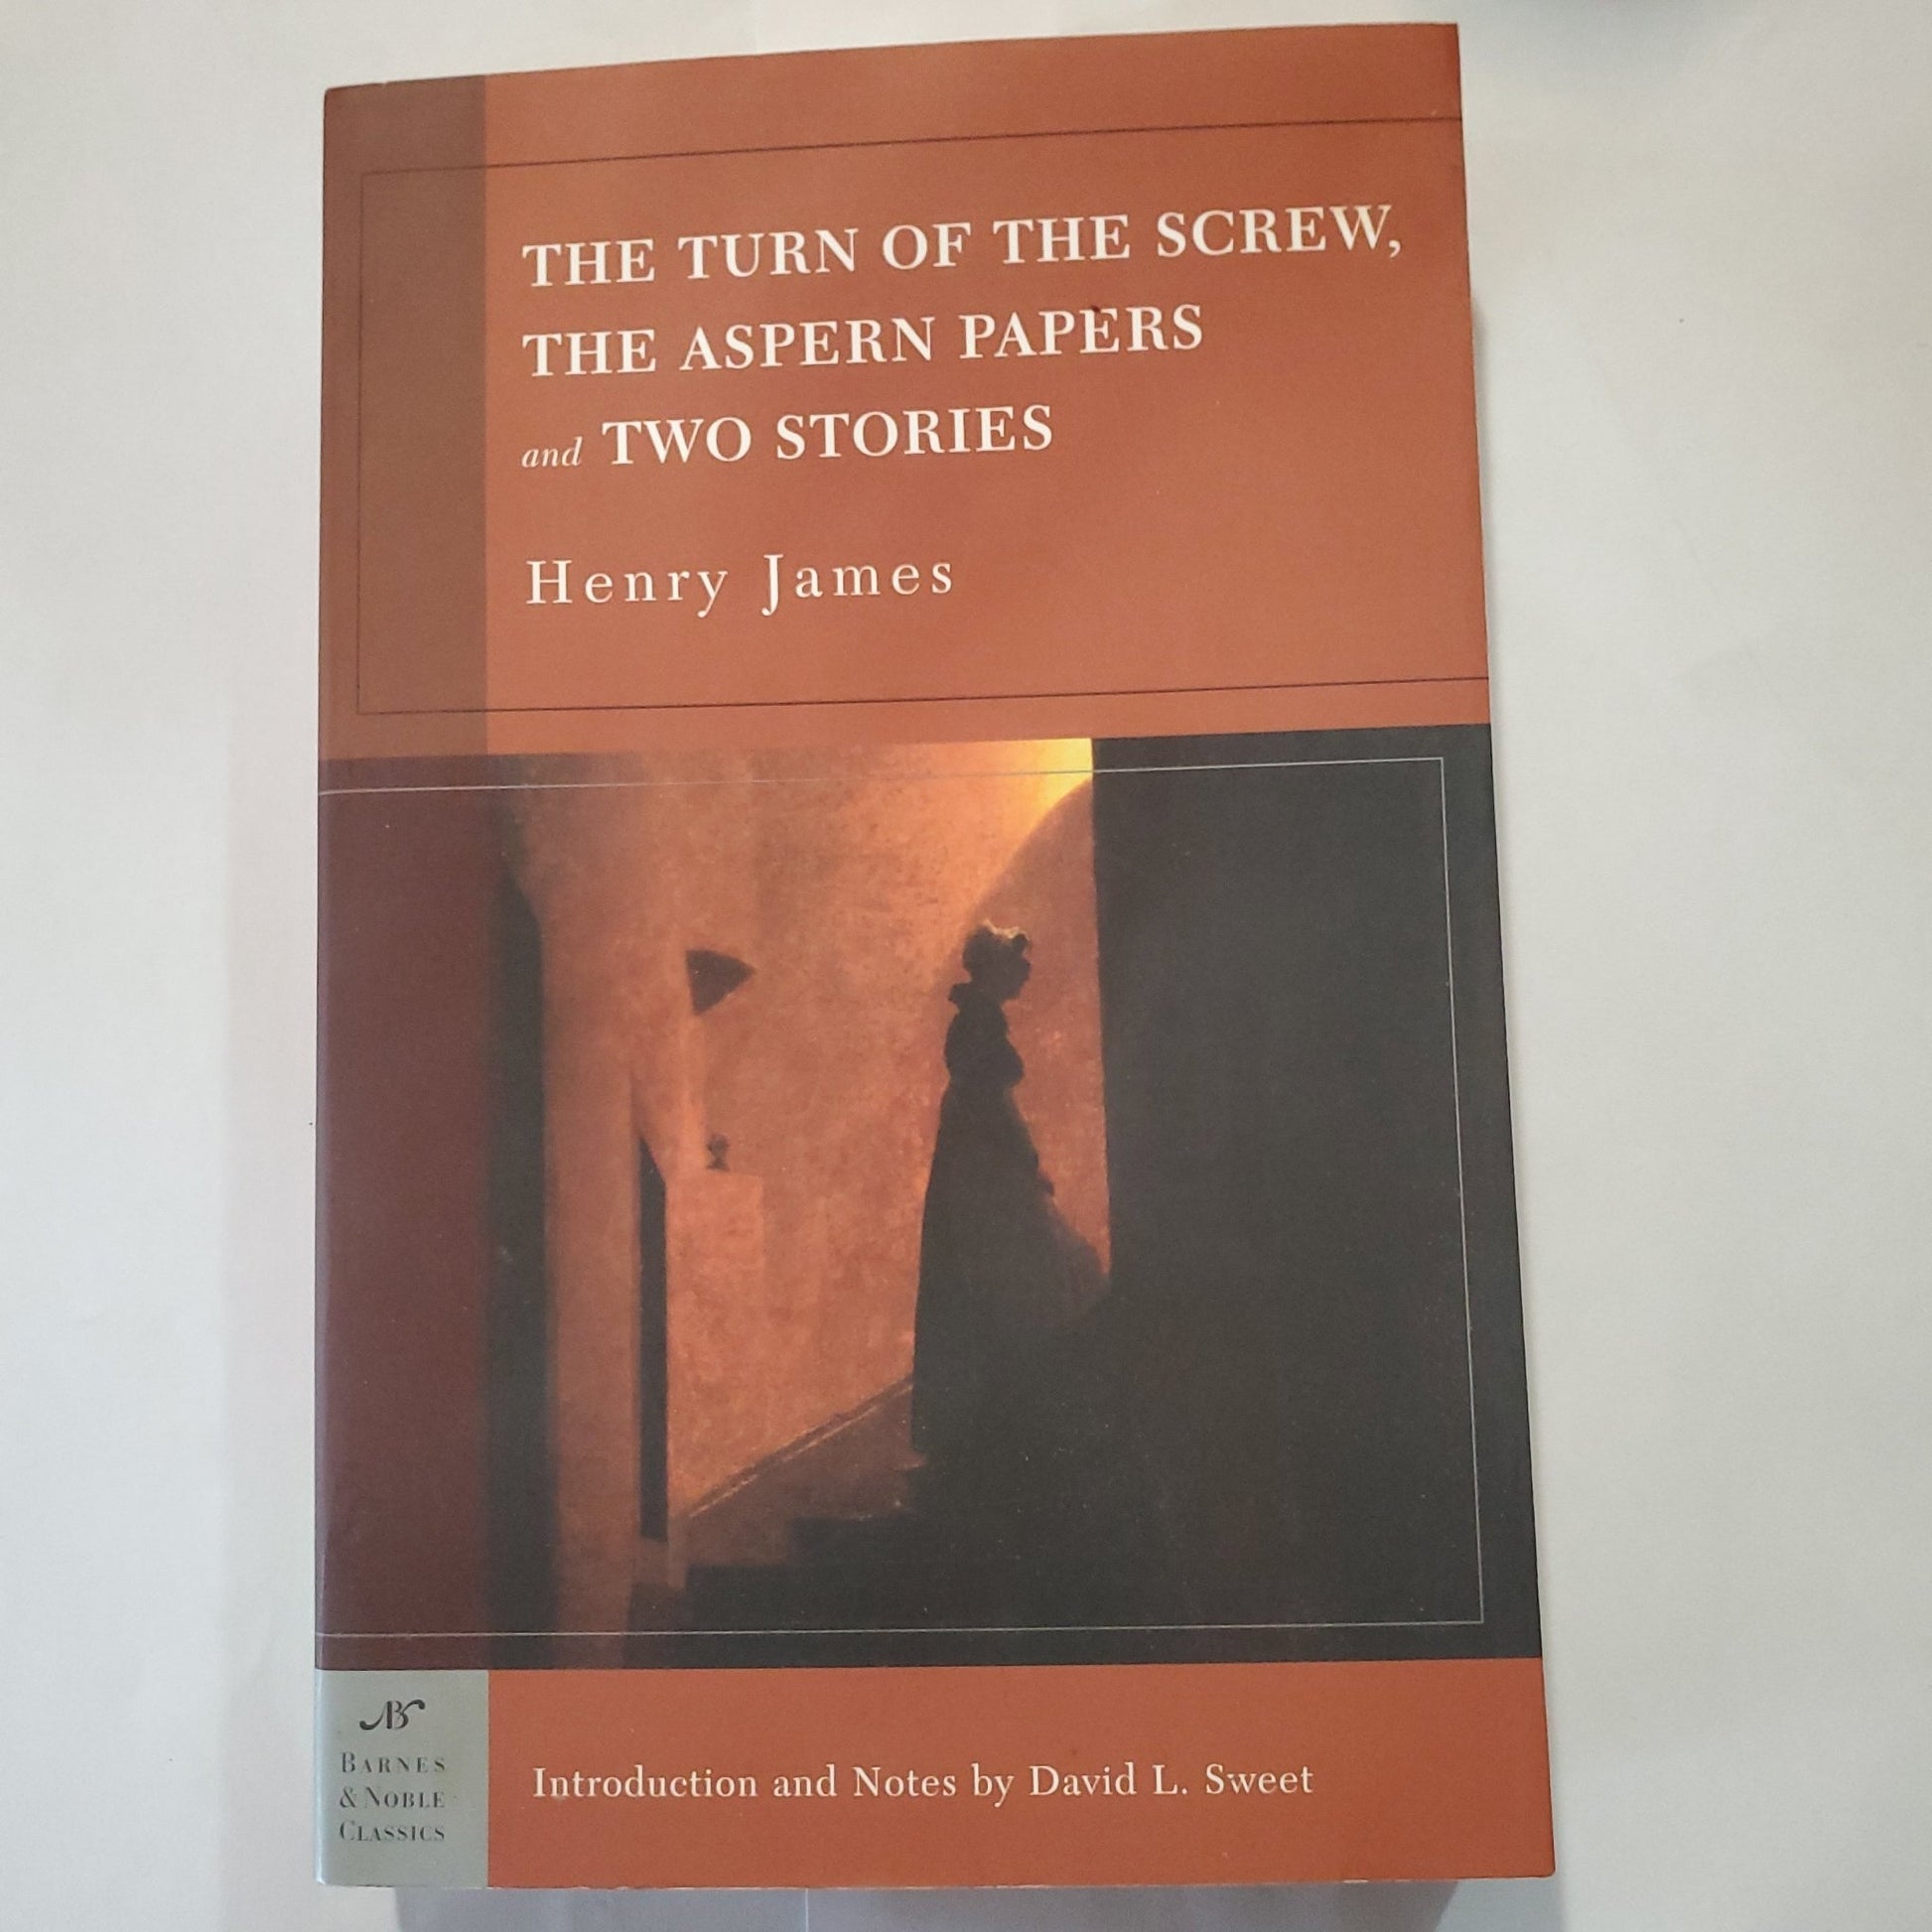 The Turn of the Screw, The Aspern Papers and Two Stories - [ash-ling] Booksellers